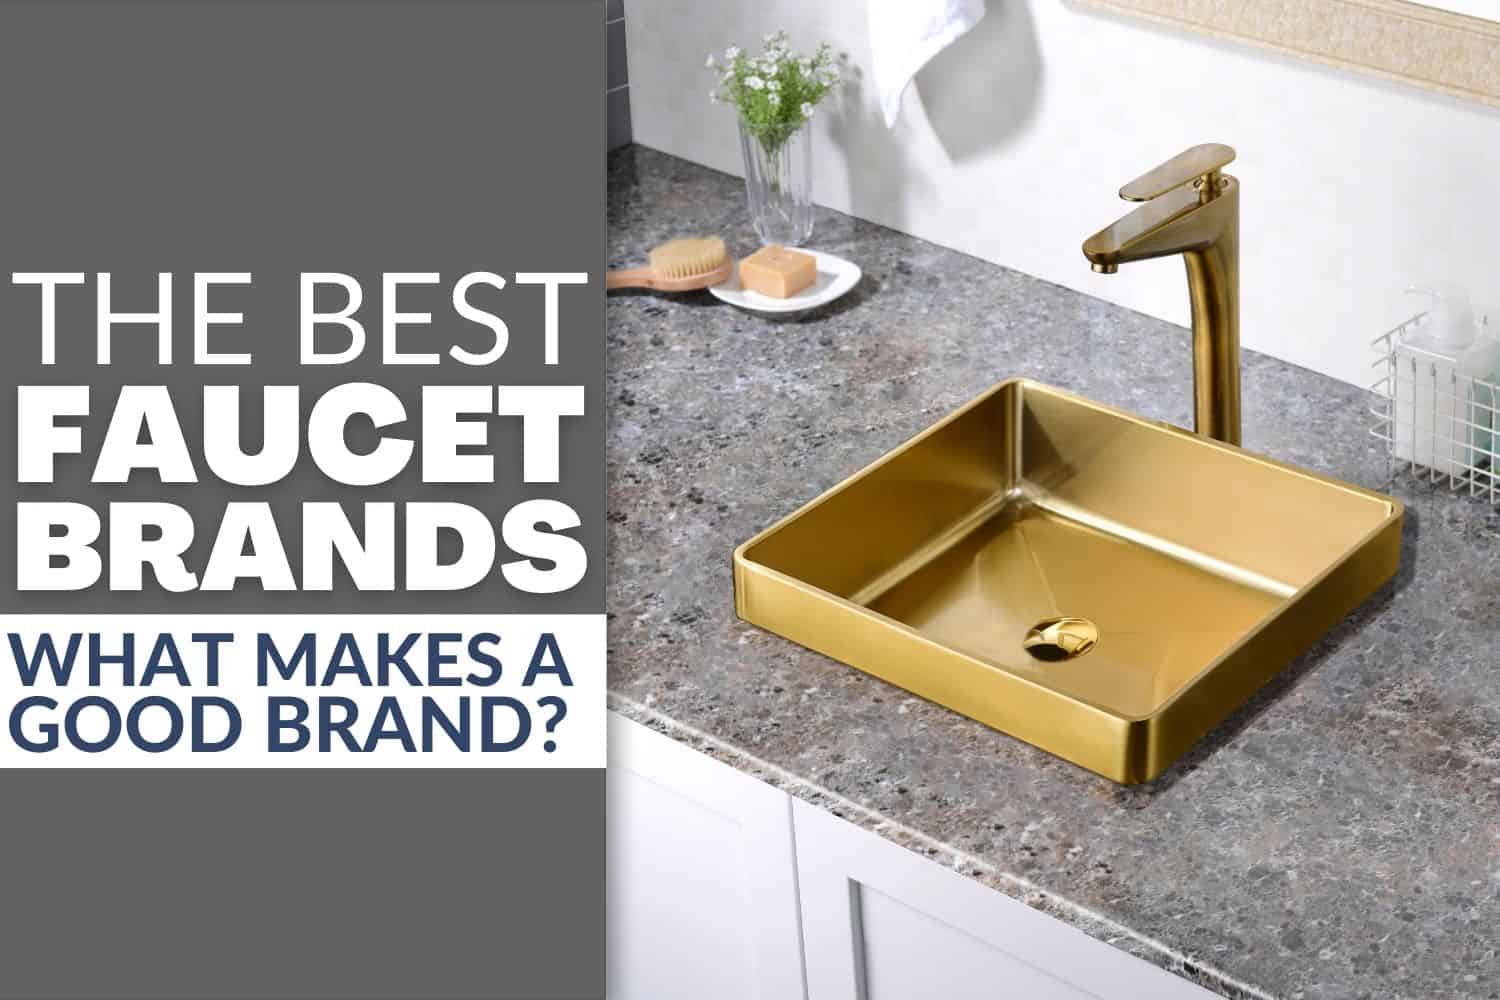 The best faucet brands: what makes a good brand?